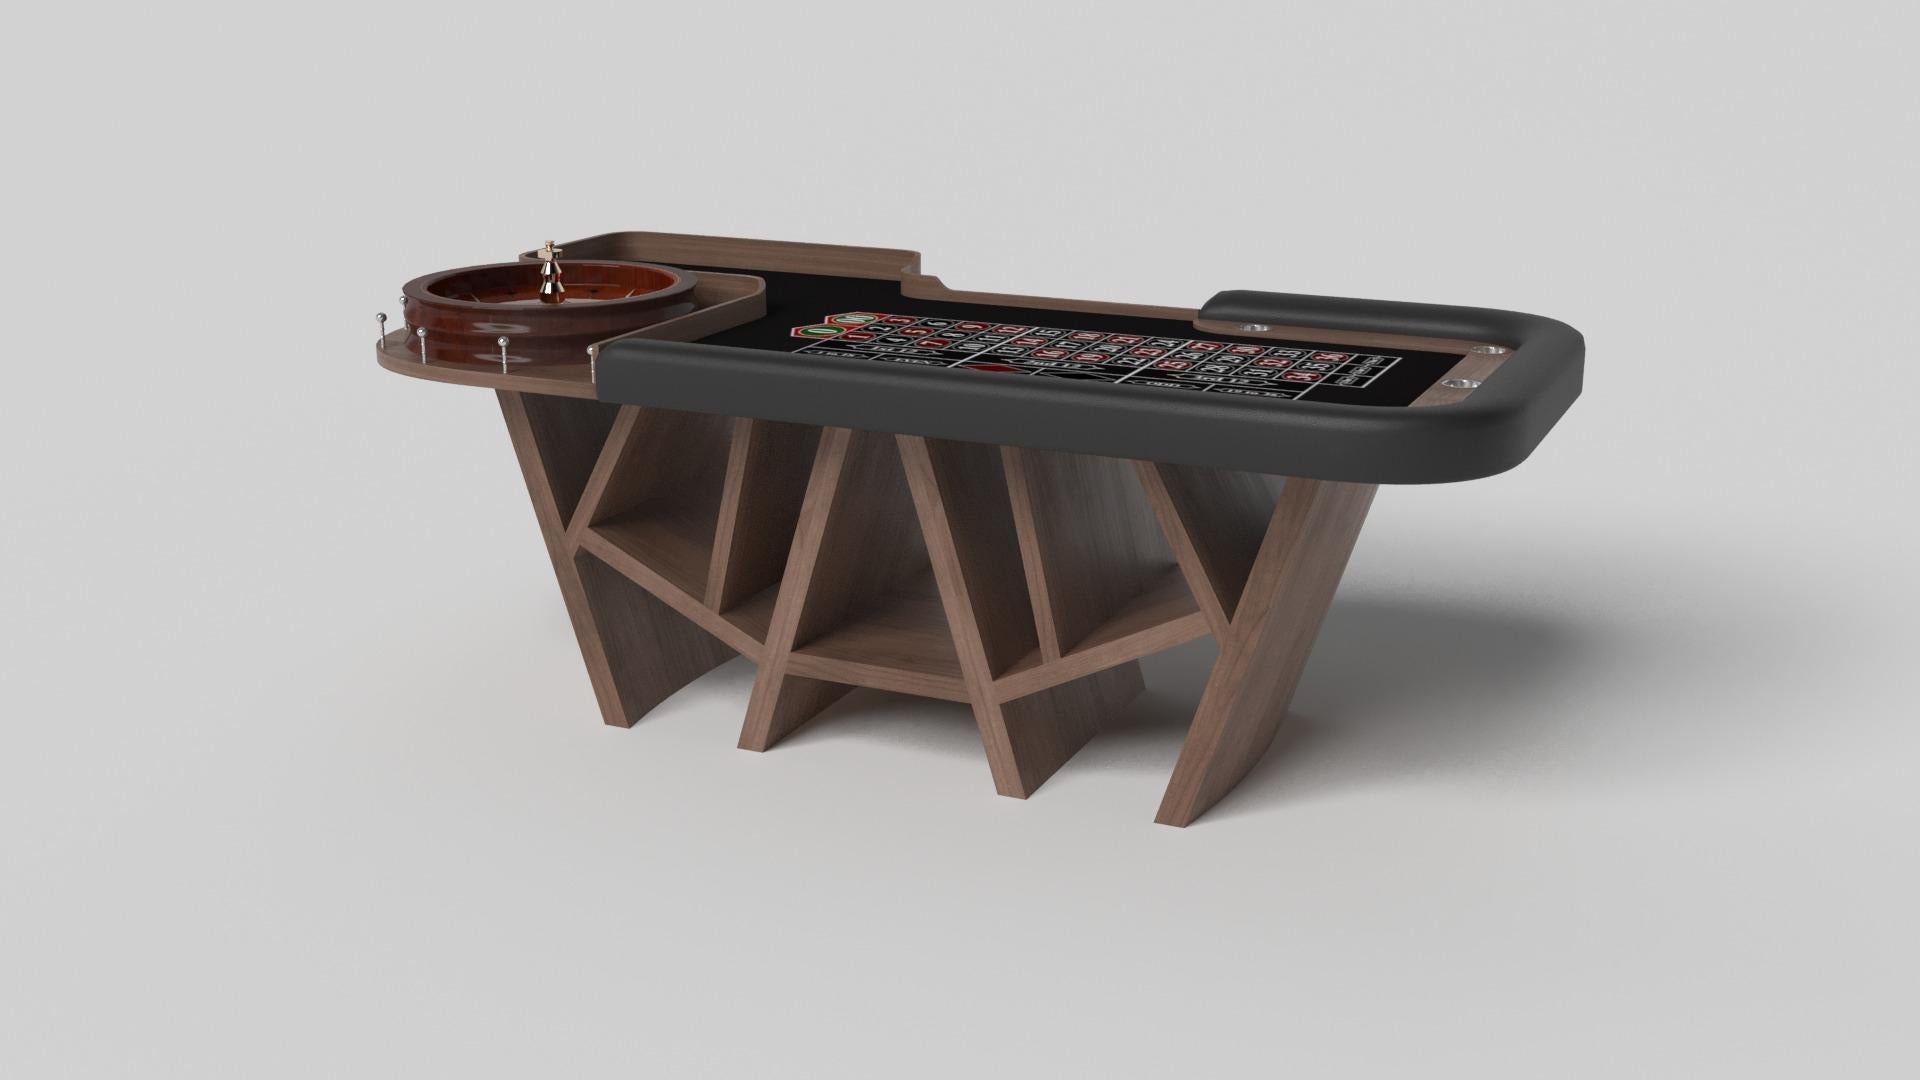 With a combination of acute angles, smooth lines, and geometric configurations, the Maze roulette table in walnut is characterized by a labyrinth-inspired base with a mystifying motif. Beautifully detailed with an American roulette wheel for endless